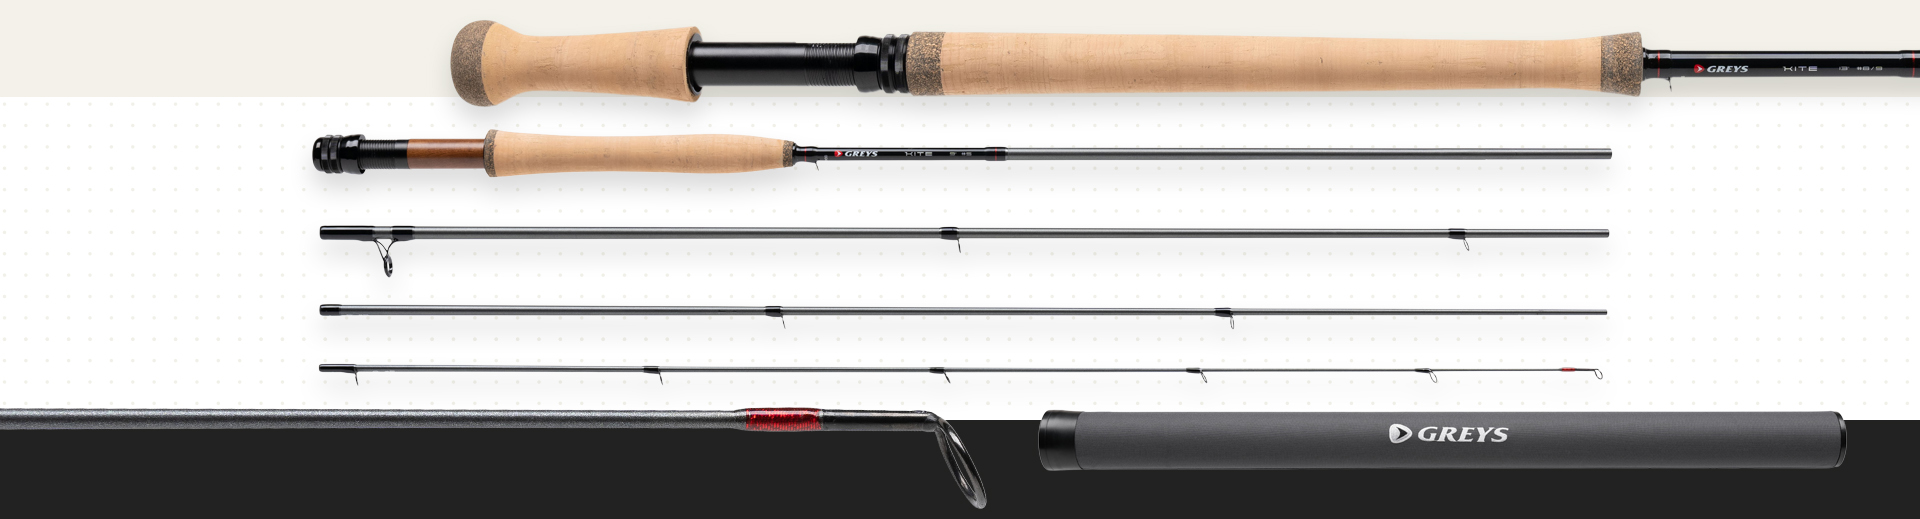 MEET KITE FLY RODS FROM GREYS.